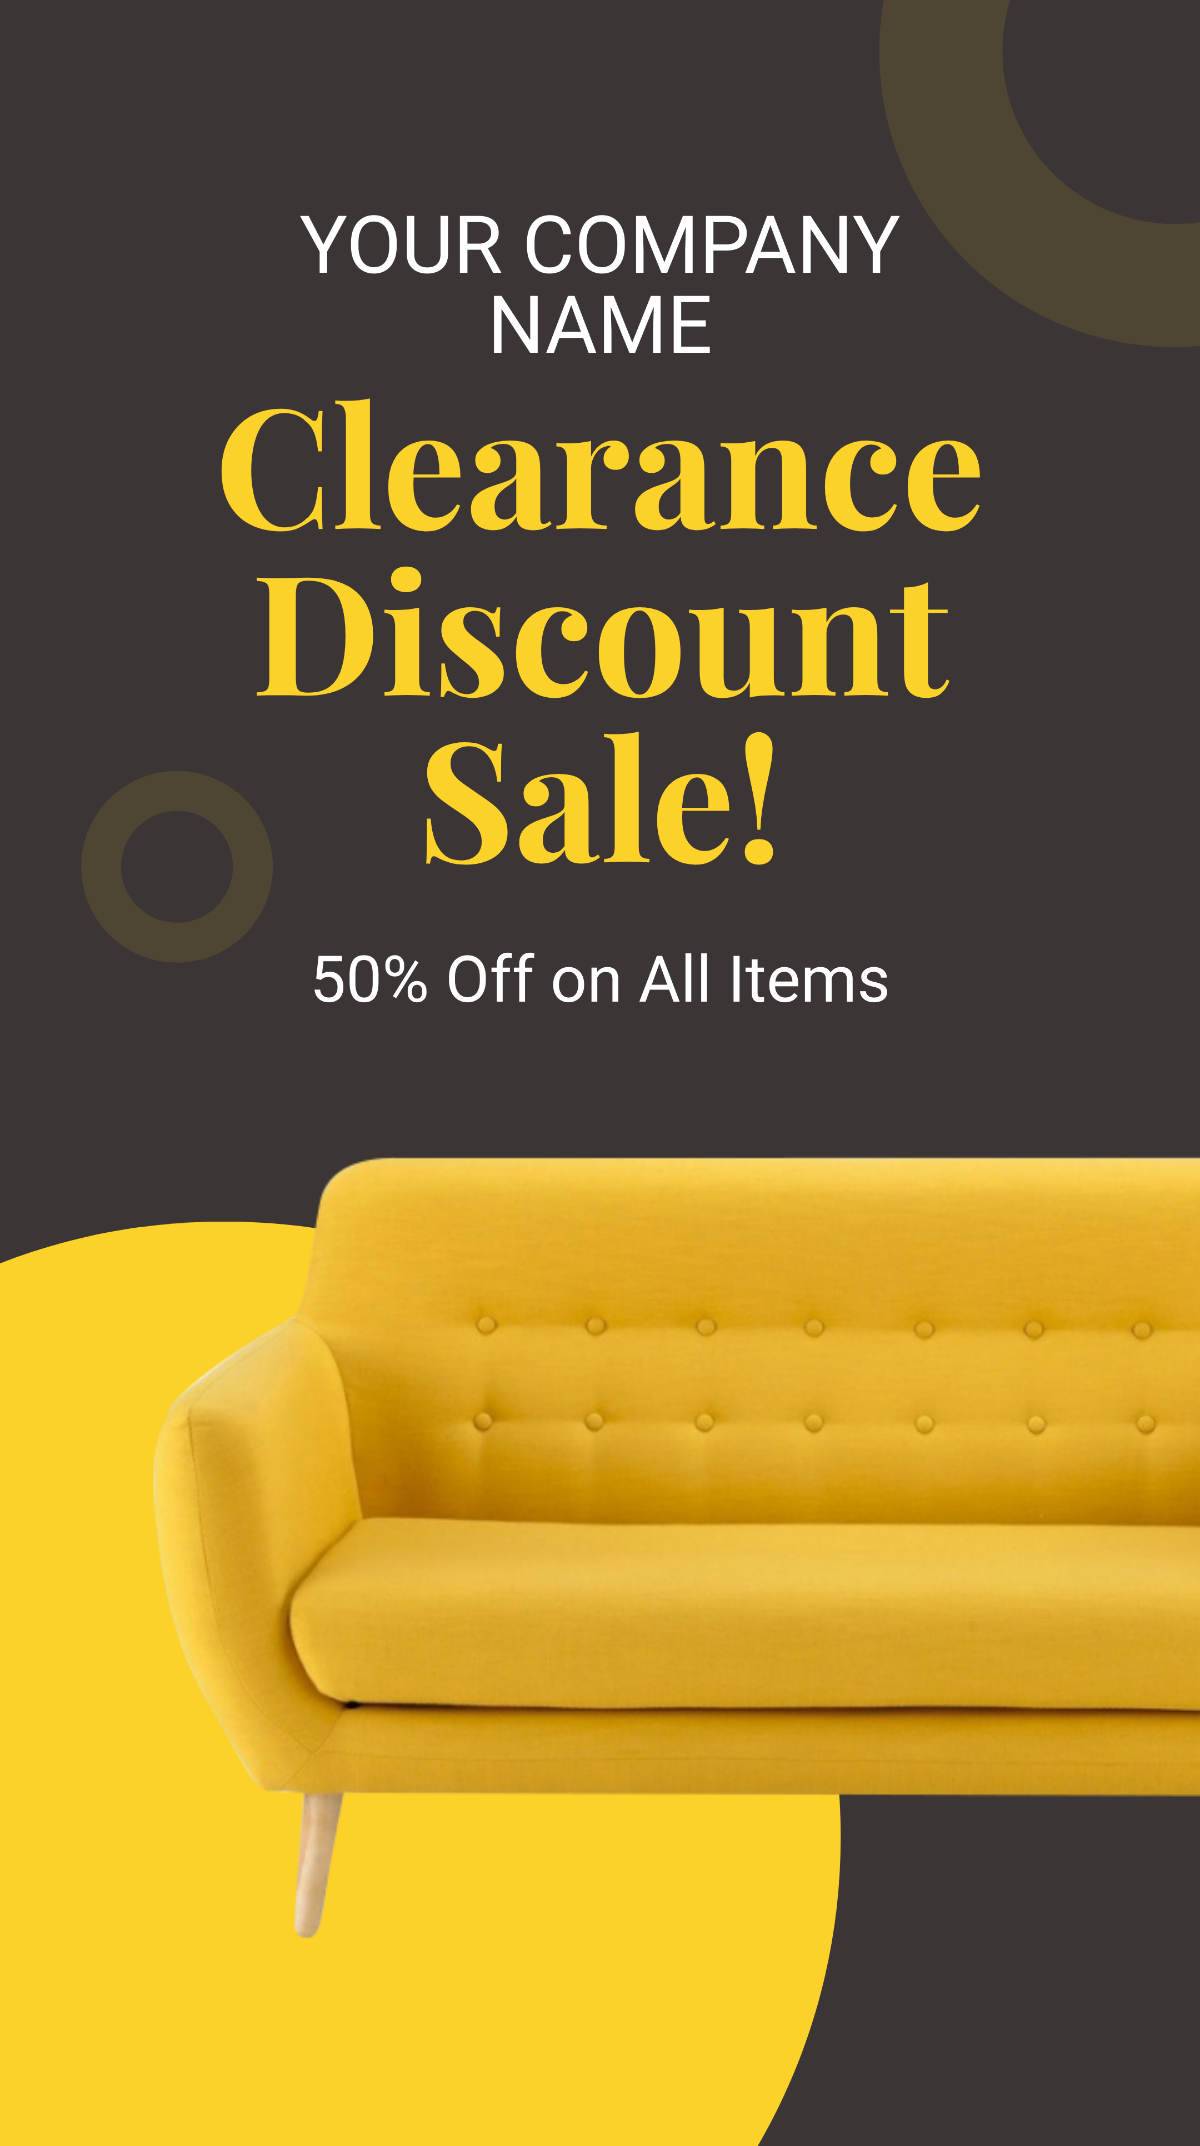 Clearance Discount Sale Instagram Story Template